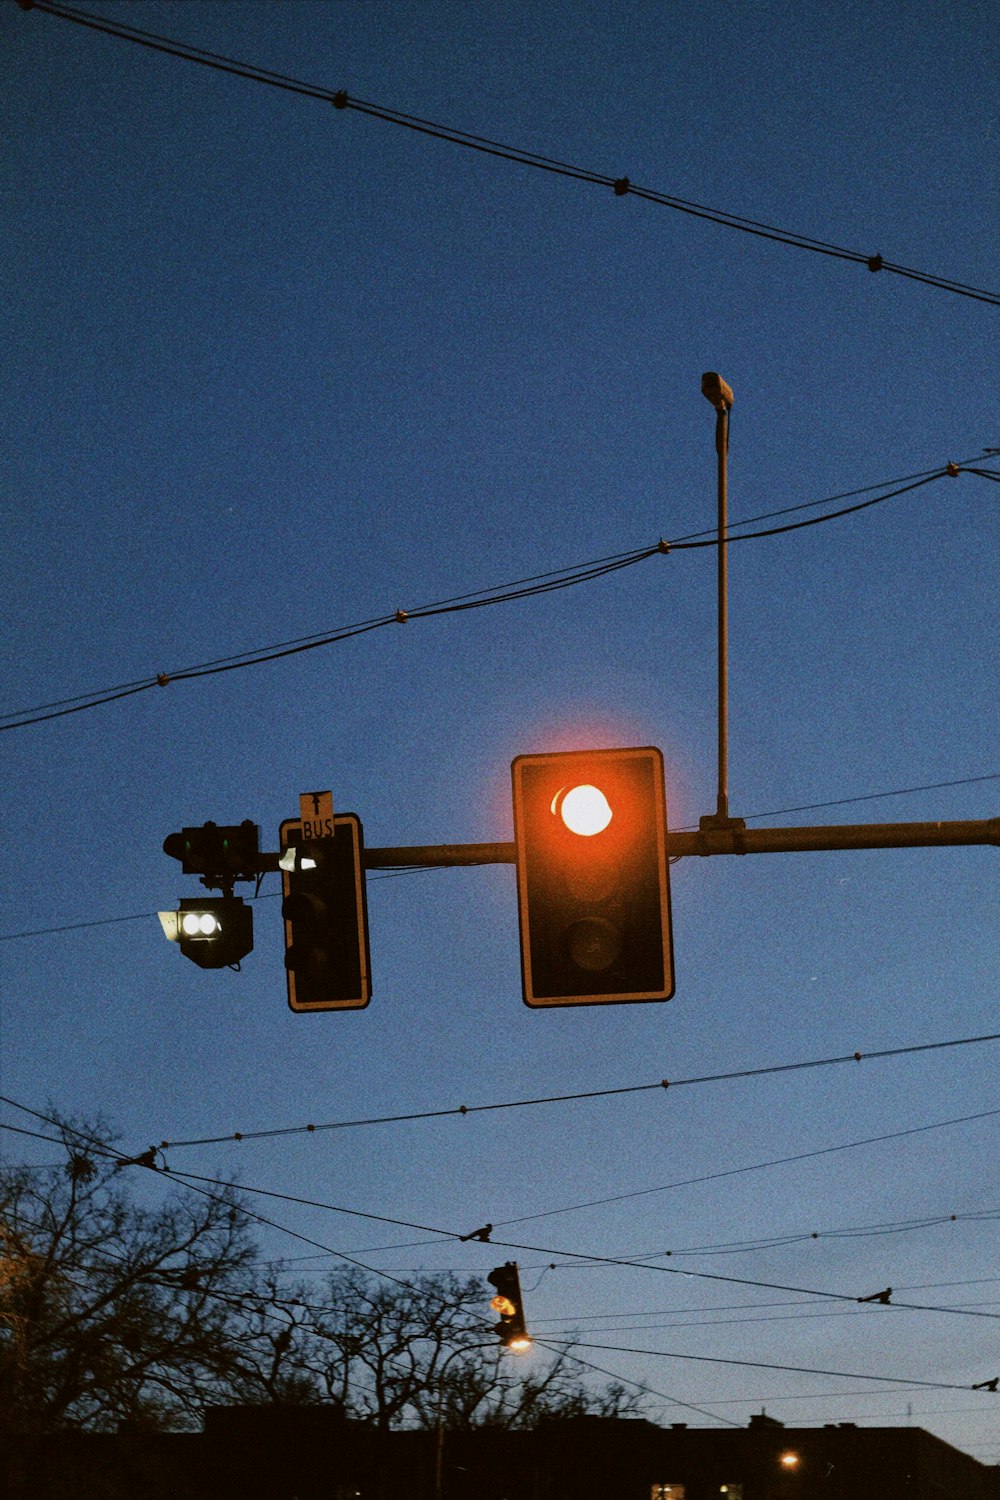 a traffic light hanging over a street at night